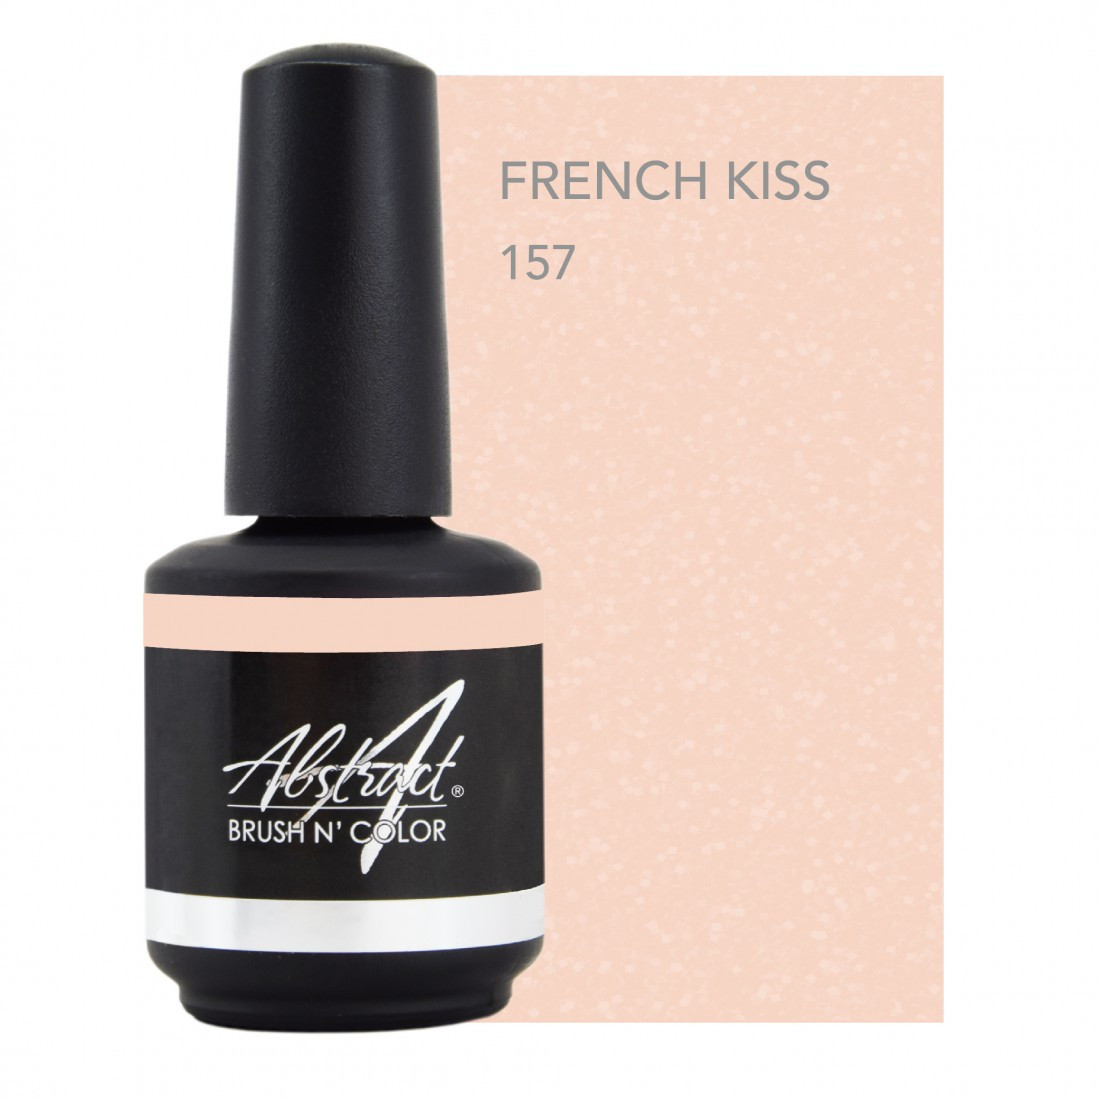 Abstract French kiss 15 ml